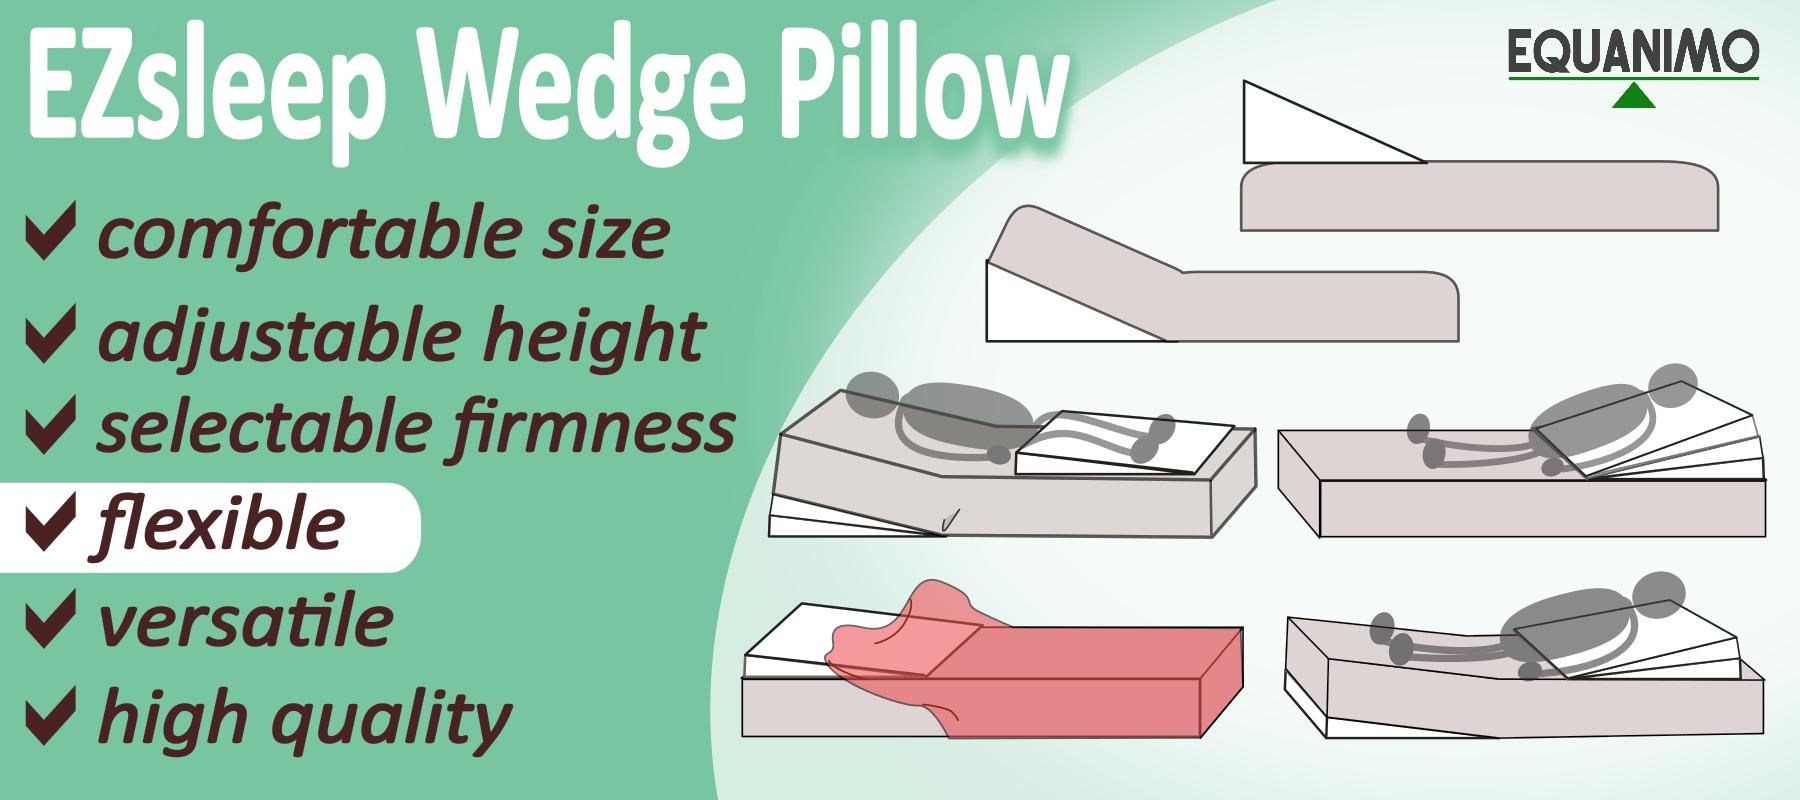 EZsleep Bed Wedge is flexible. The wedge layers can be put on or under the mattress, directly under the bedsheet. It is great for both body and legs. 